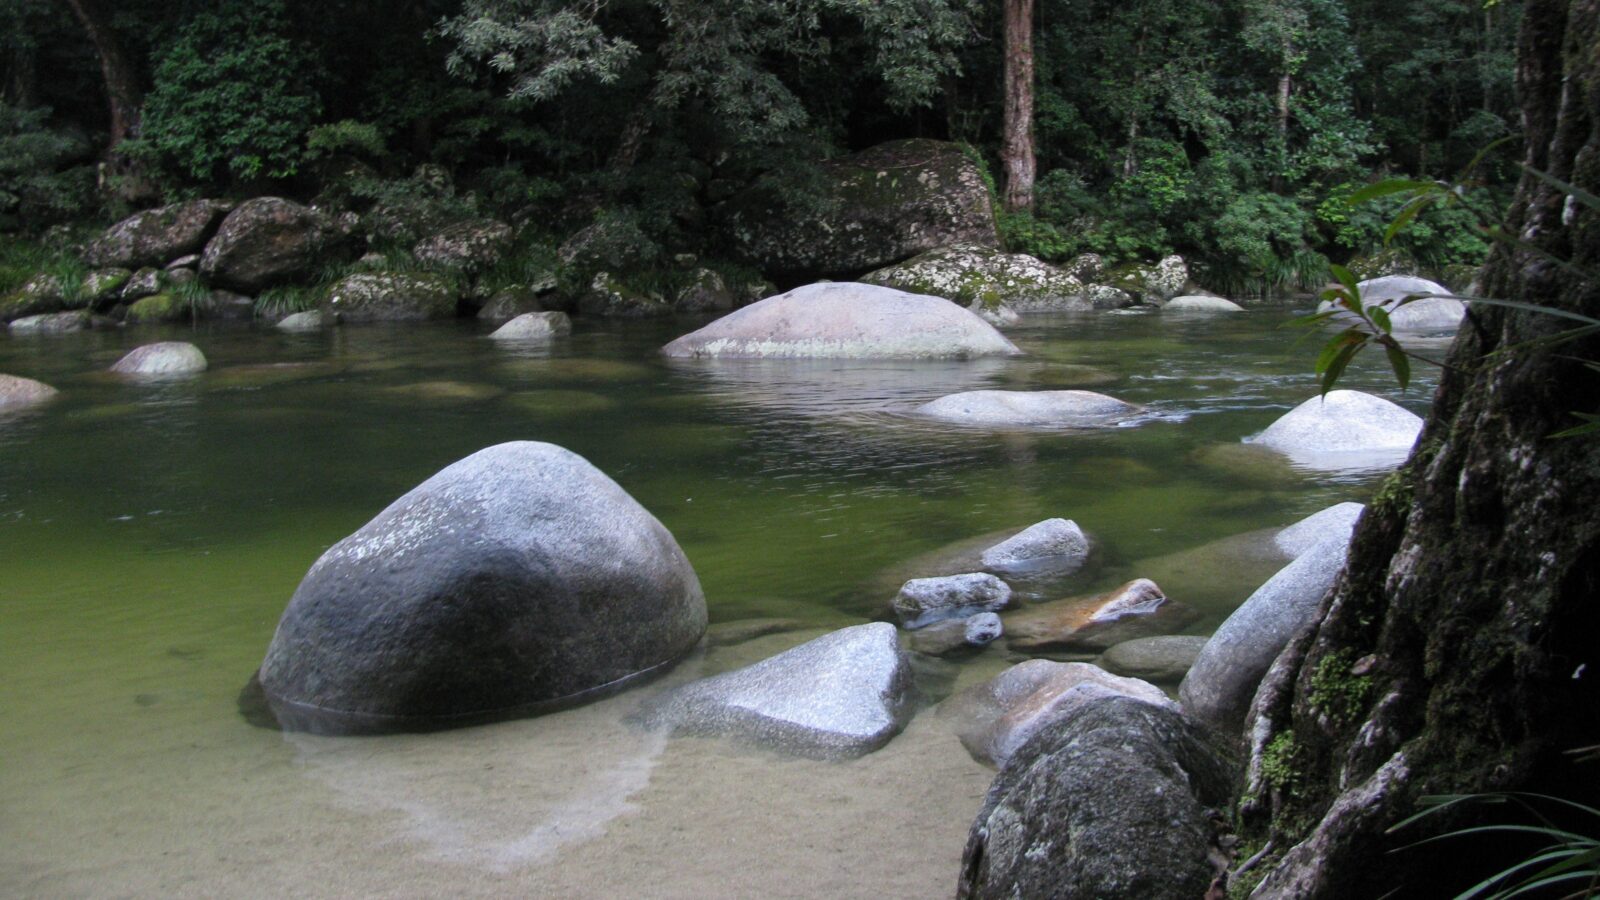 Mossman Gorge Bed and Breakfast